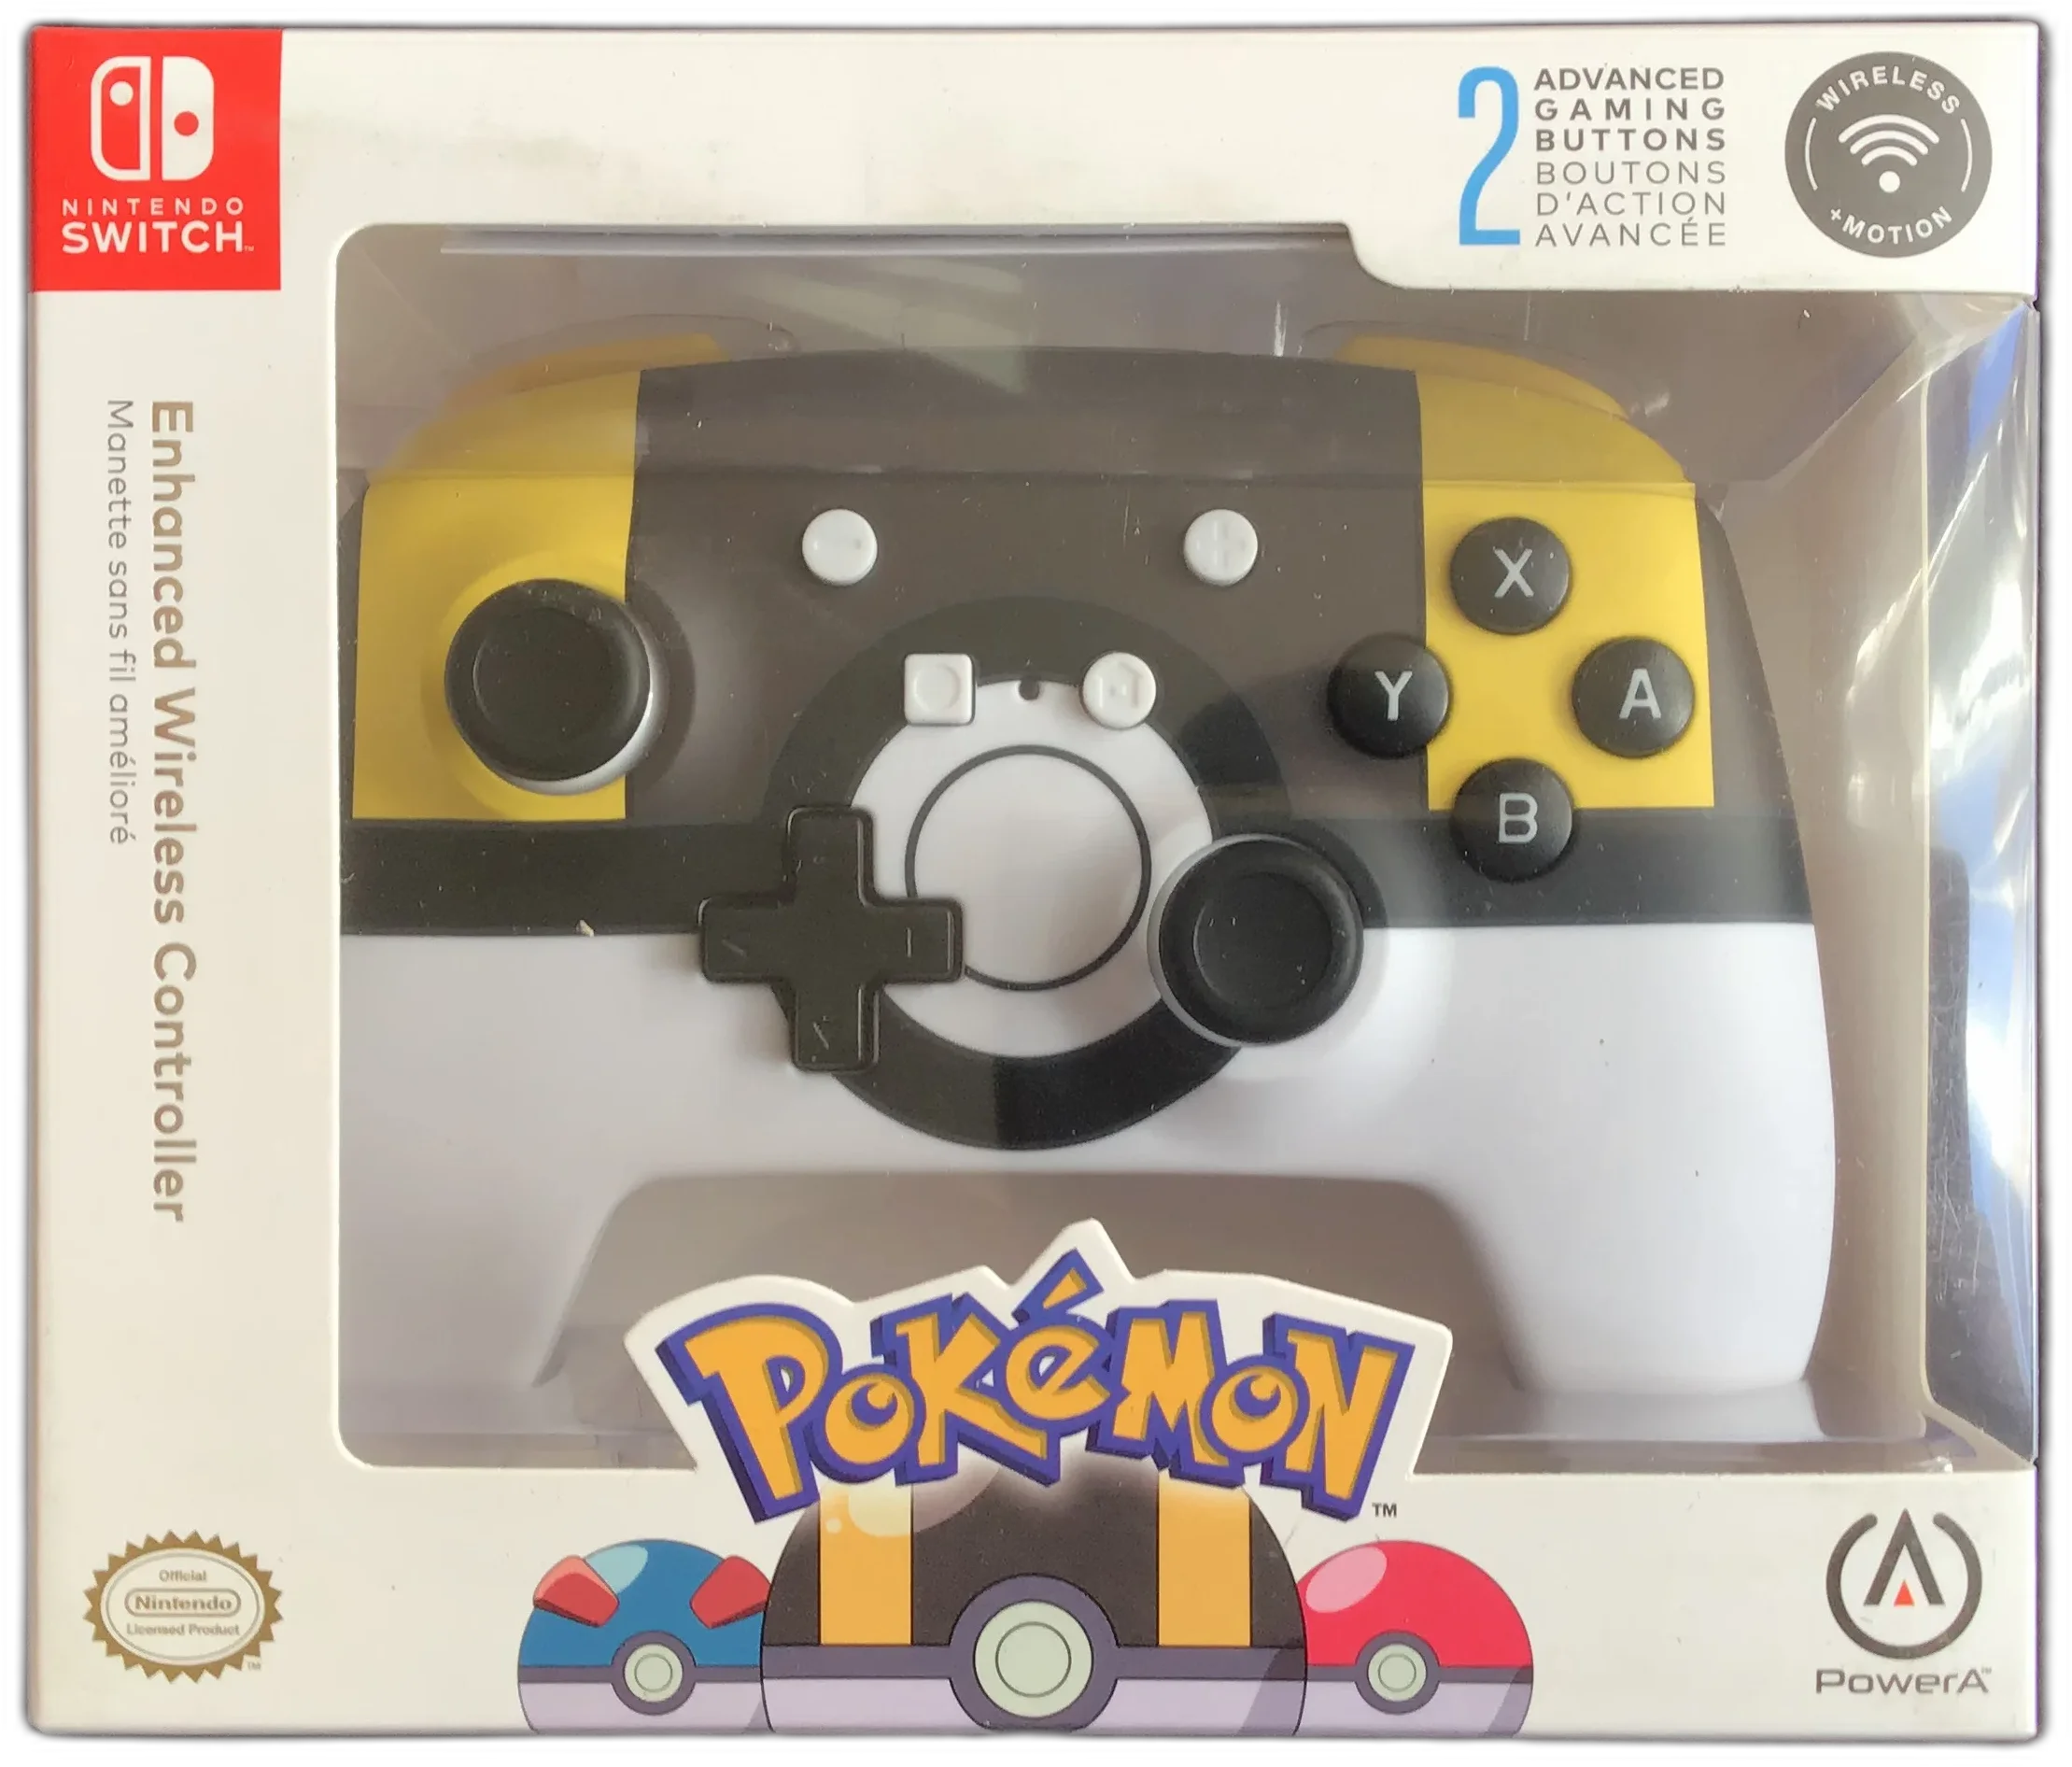  Power A Switch Pokemon Ultra Ball Enhanced Wired Controller